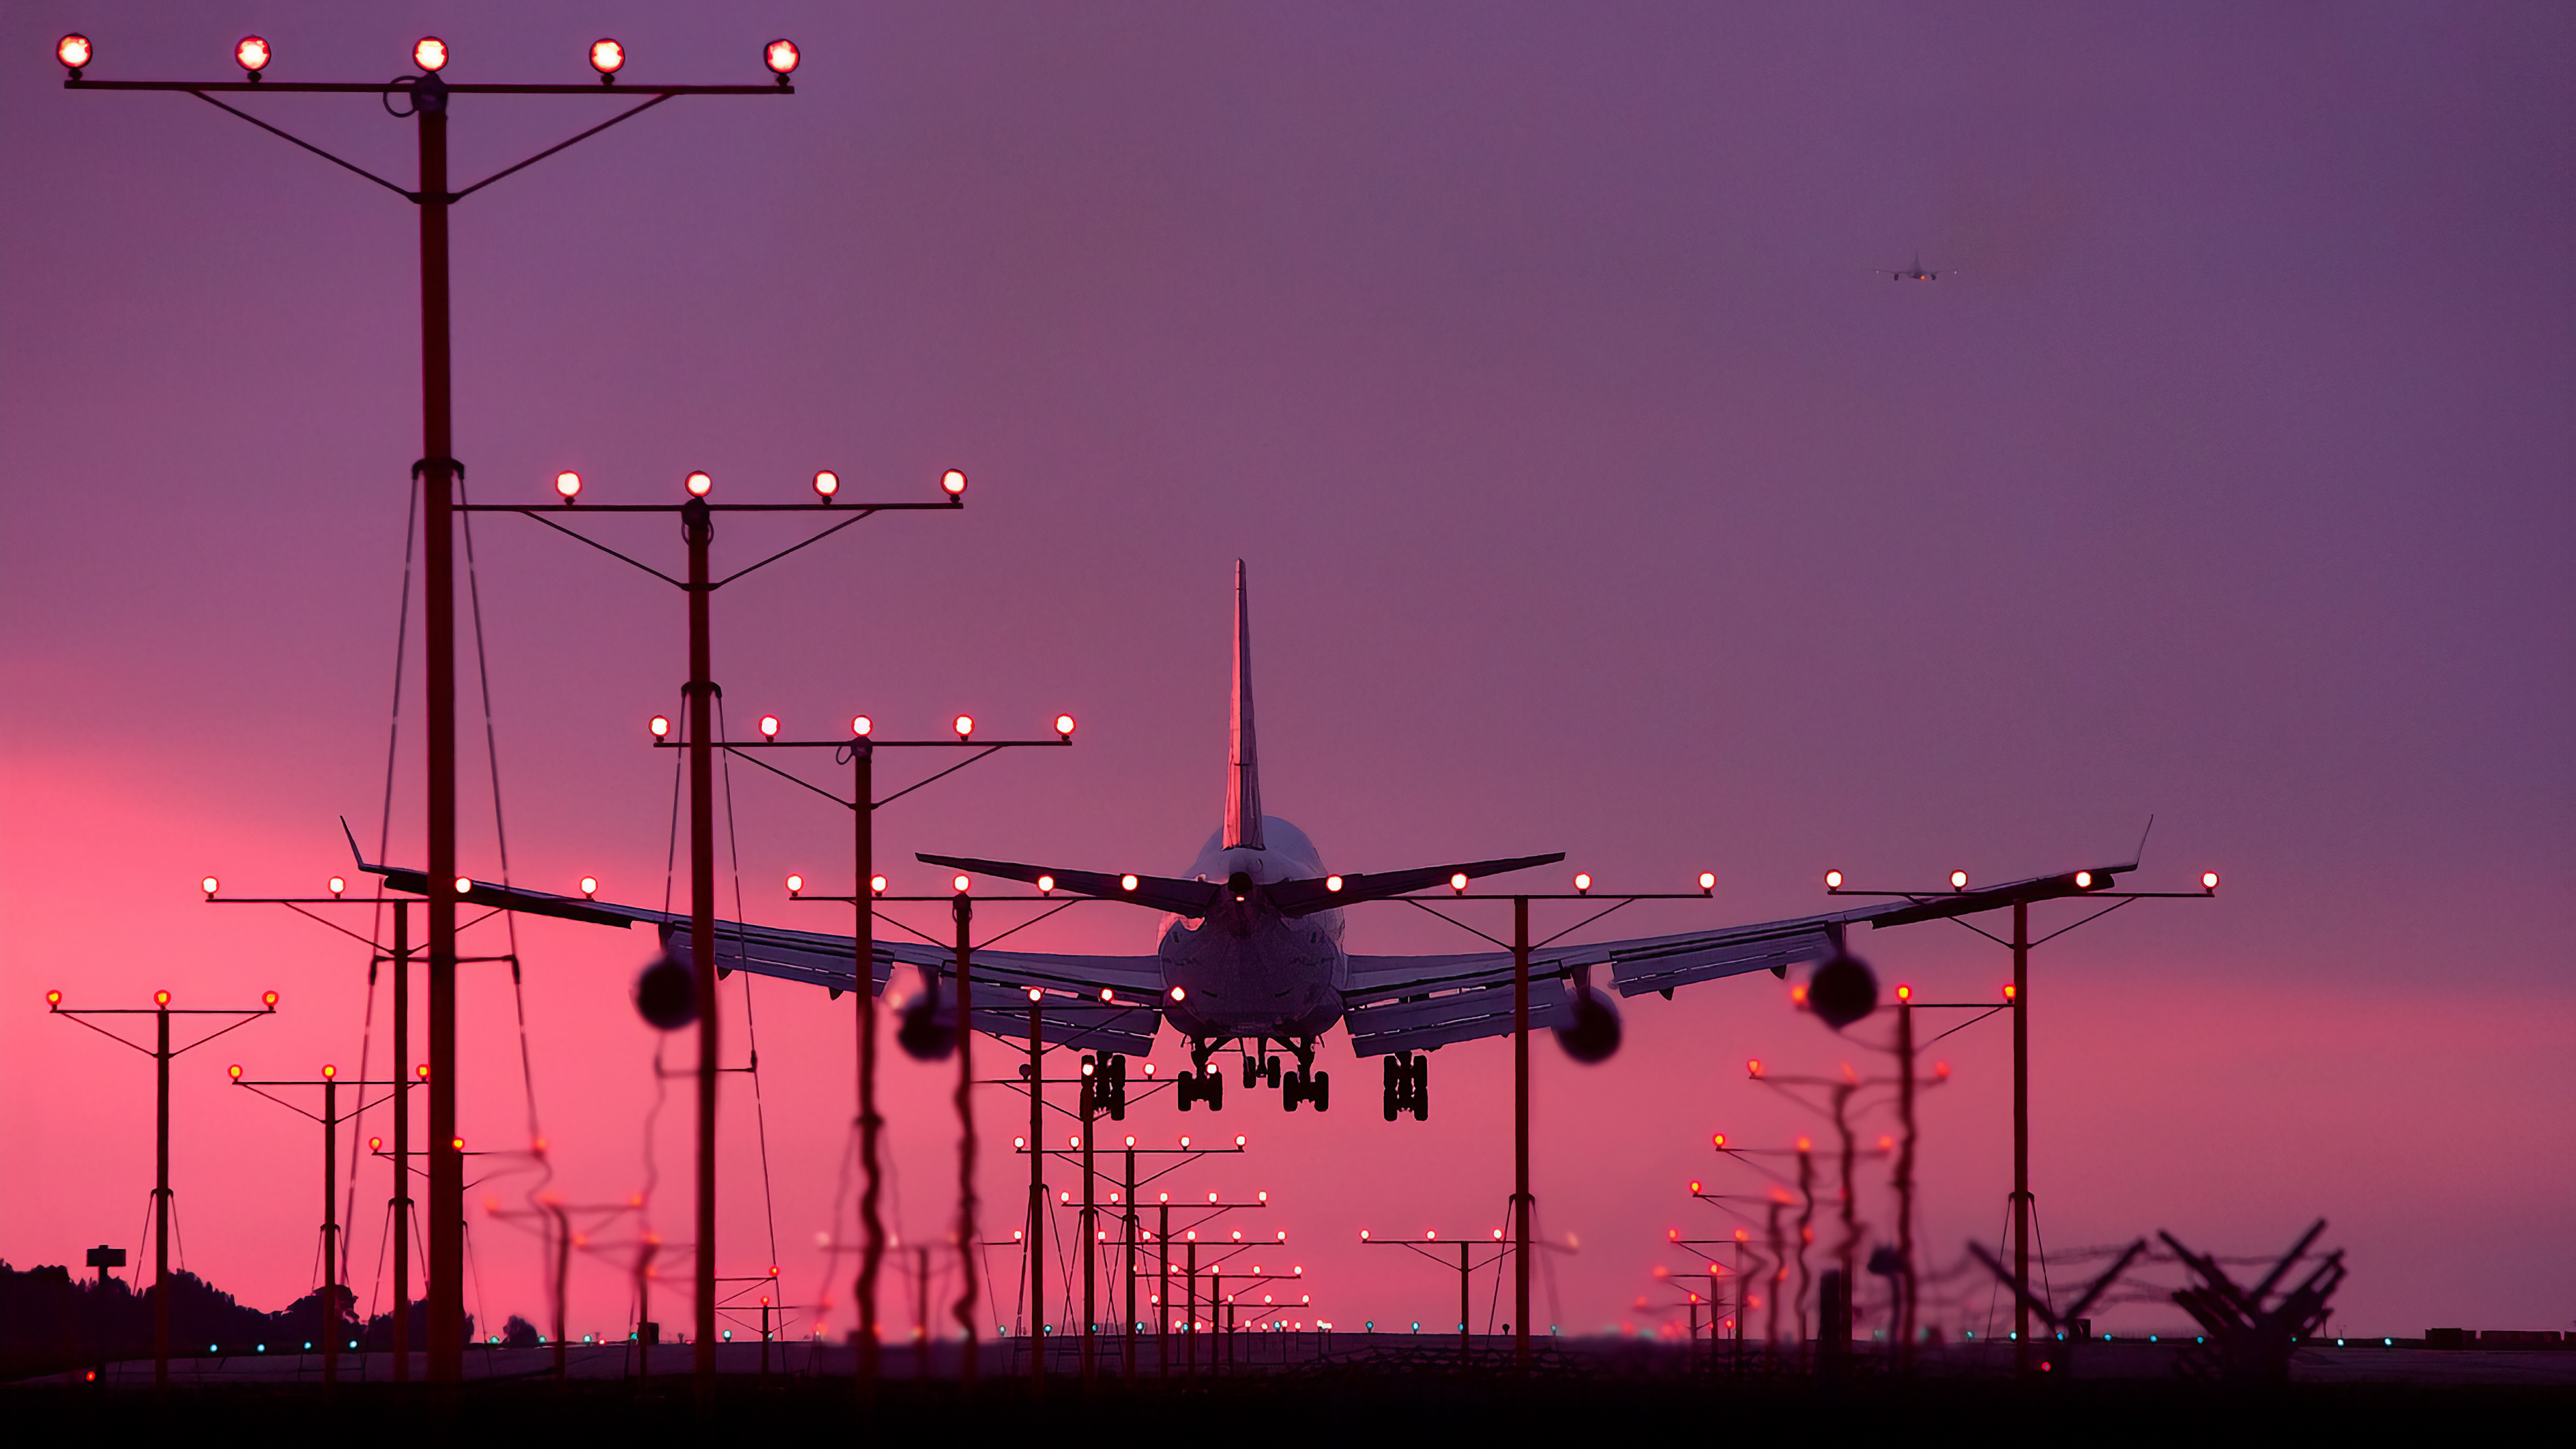 Vehicles Airplane HD Wallpaper | Background Image